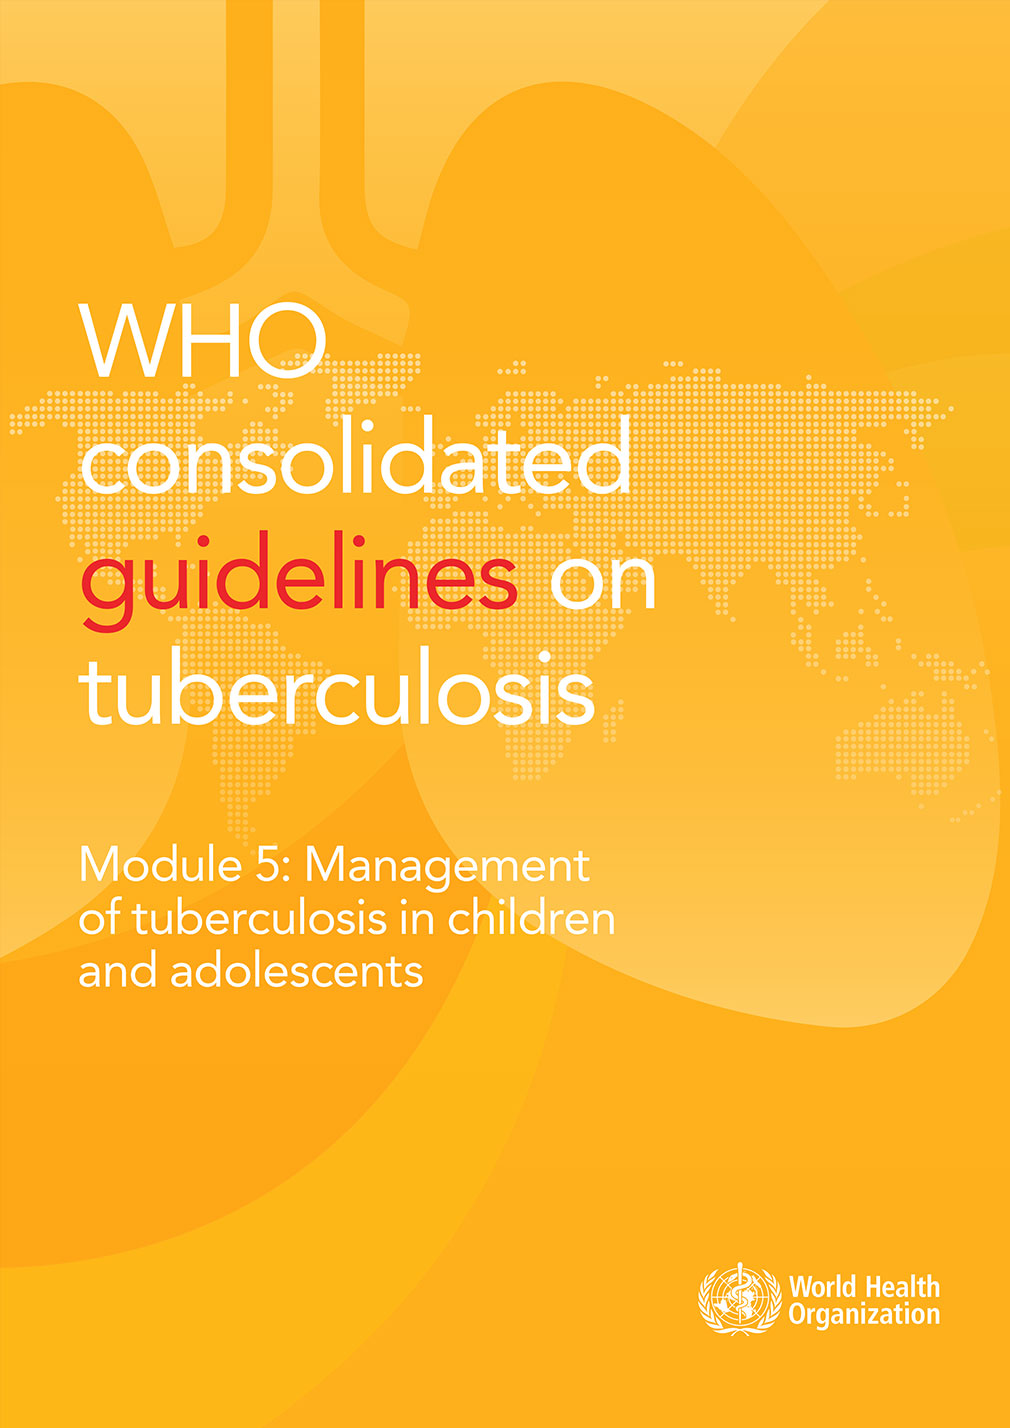 Management of tuberculosis in children and adolescents